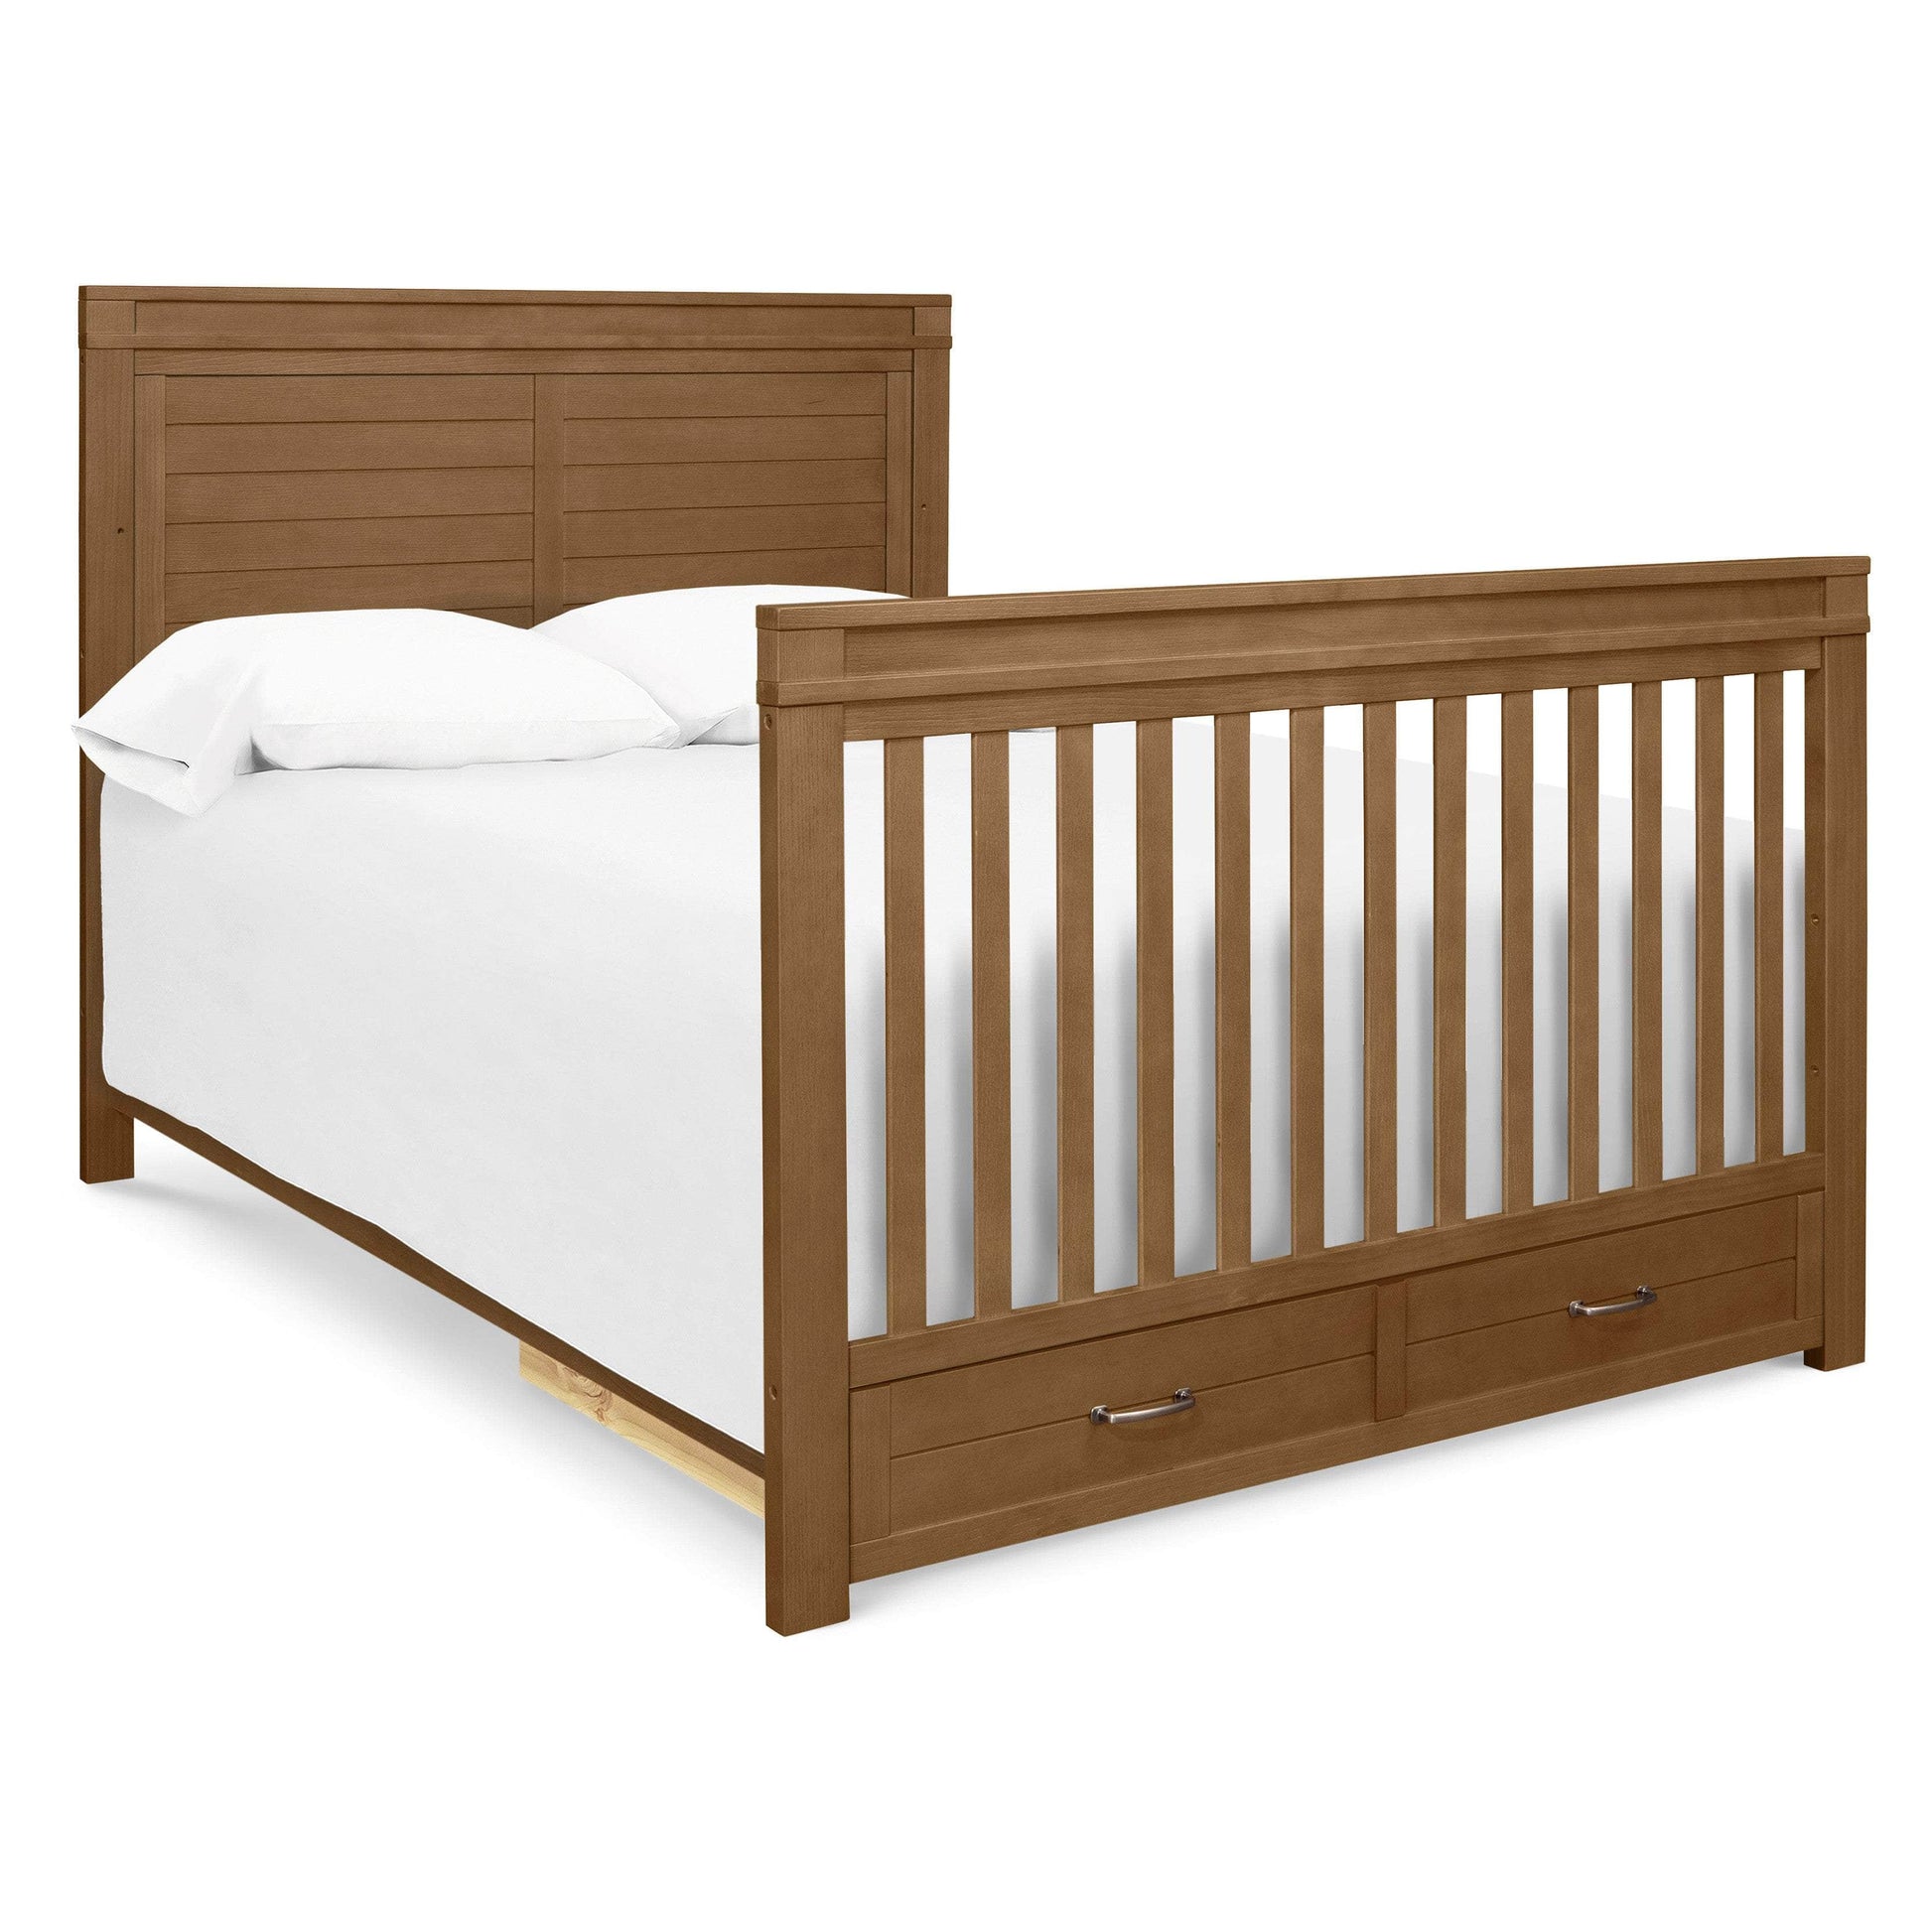 M21101SW,Wesley Farmhouse 4-in-1 Convertible Crib in Stablewood